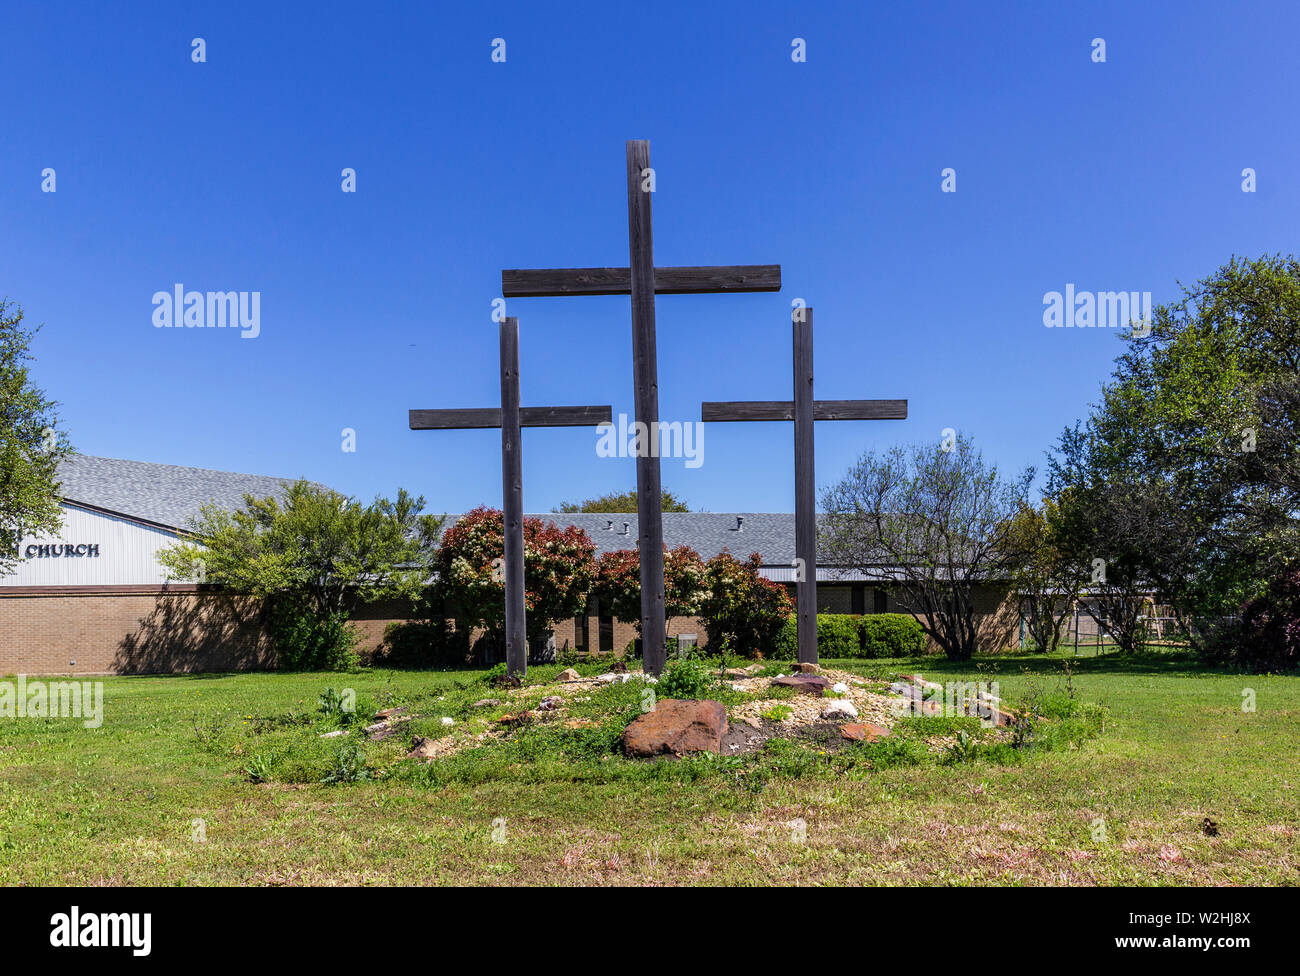 Large wooden crosses outside a church in Dallas, Texas, USA Stock Photo